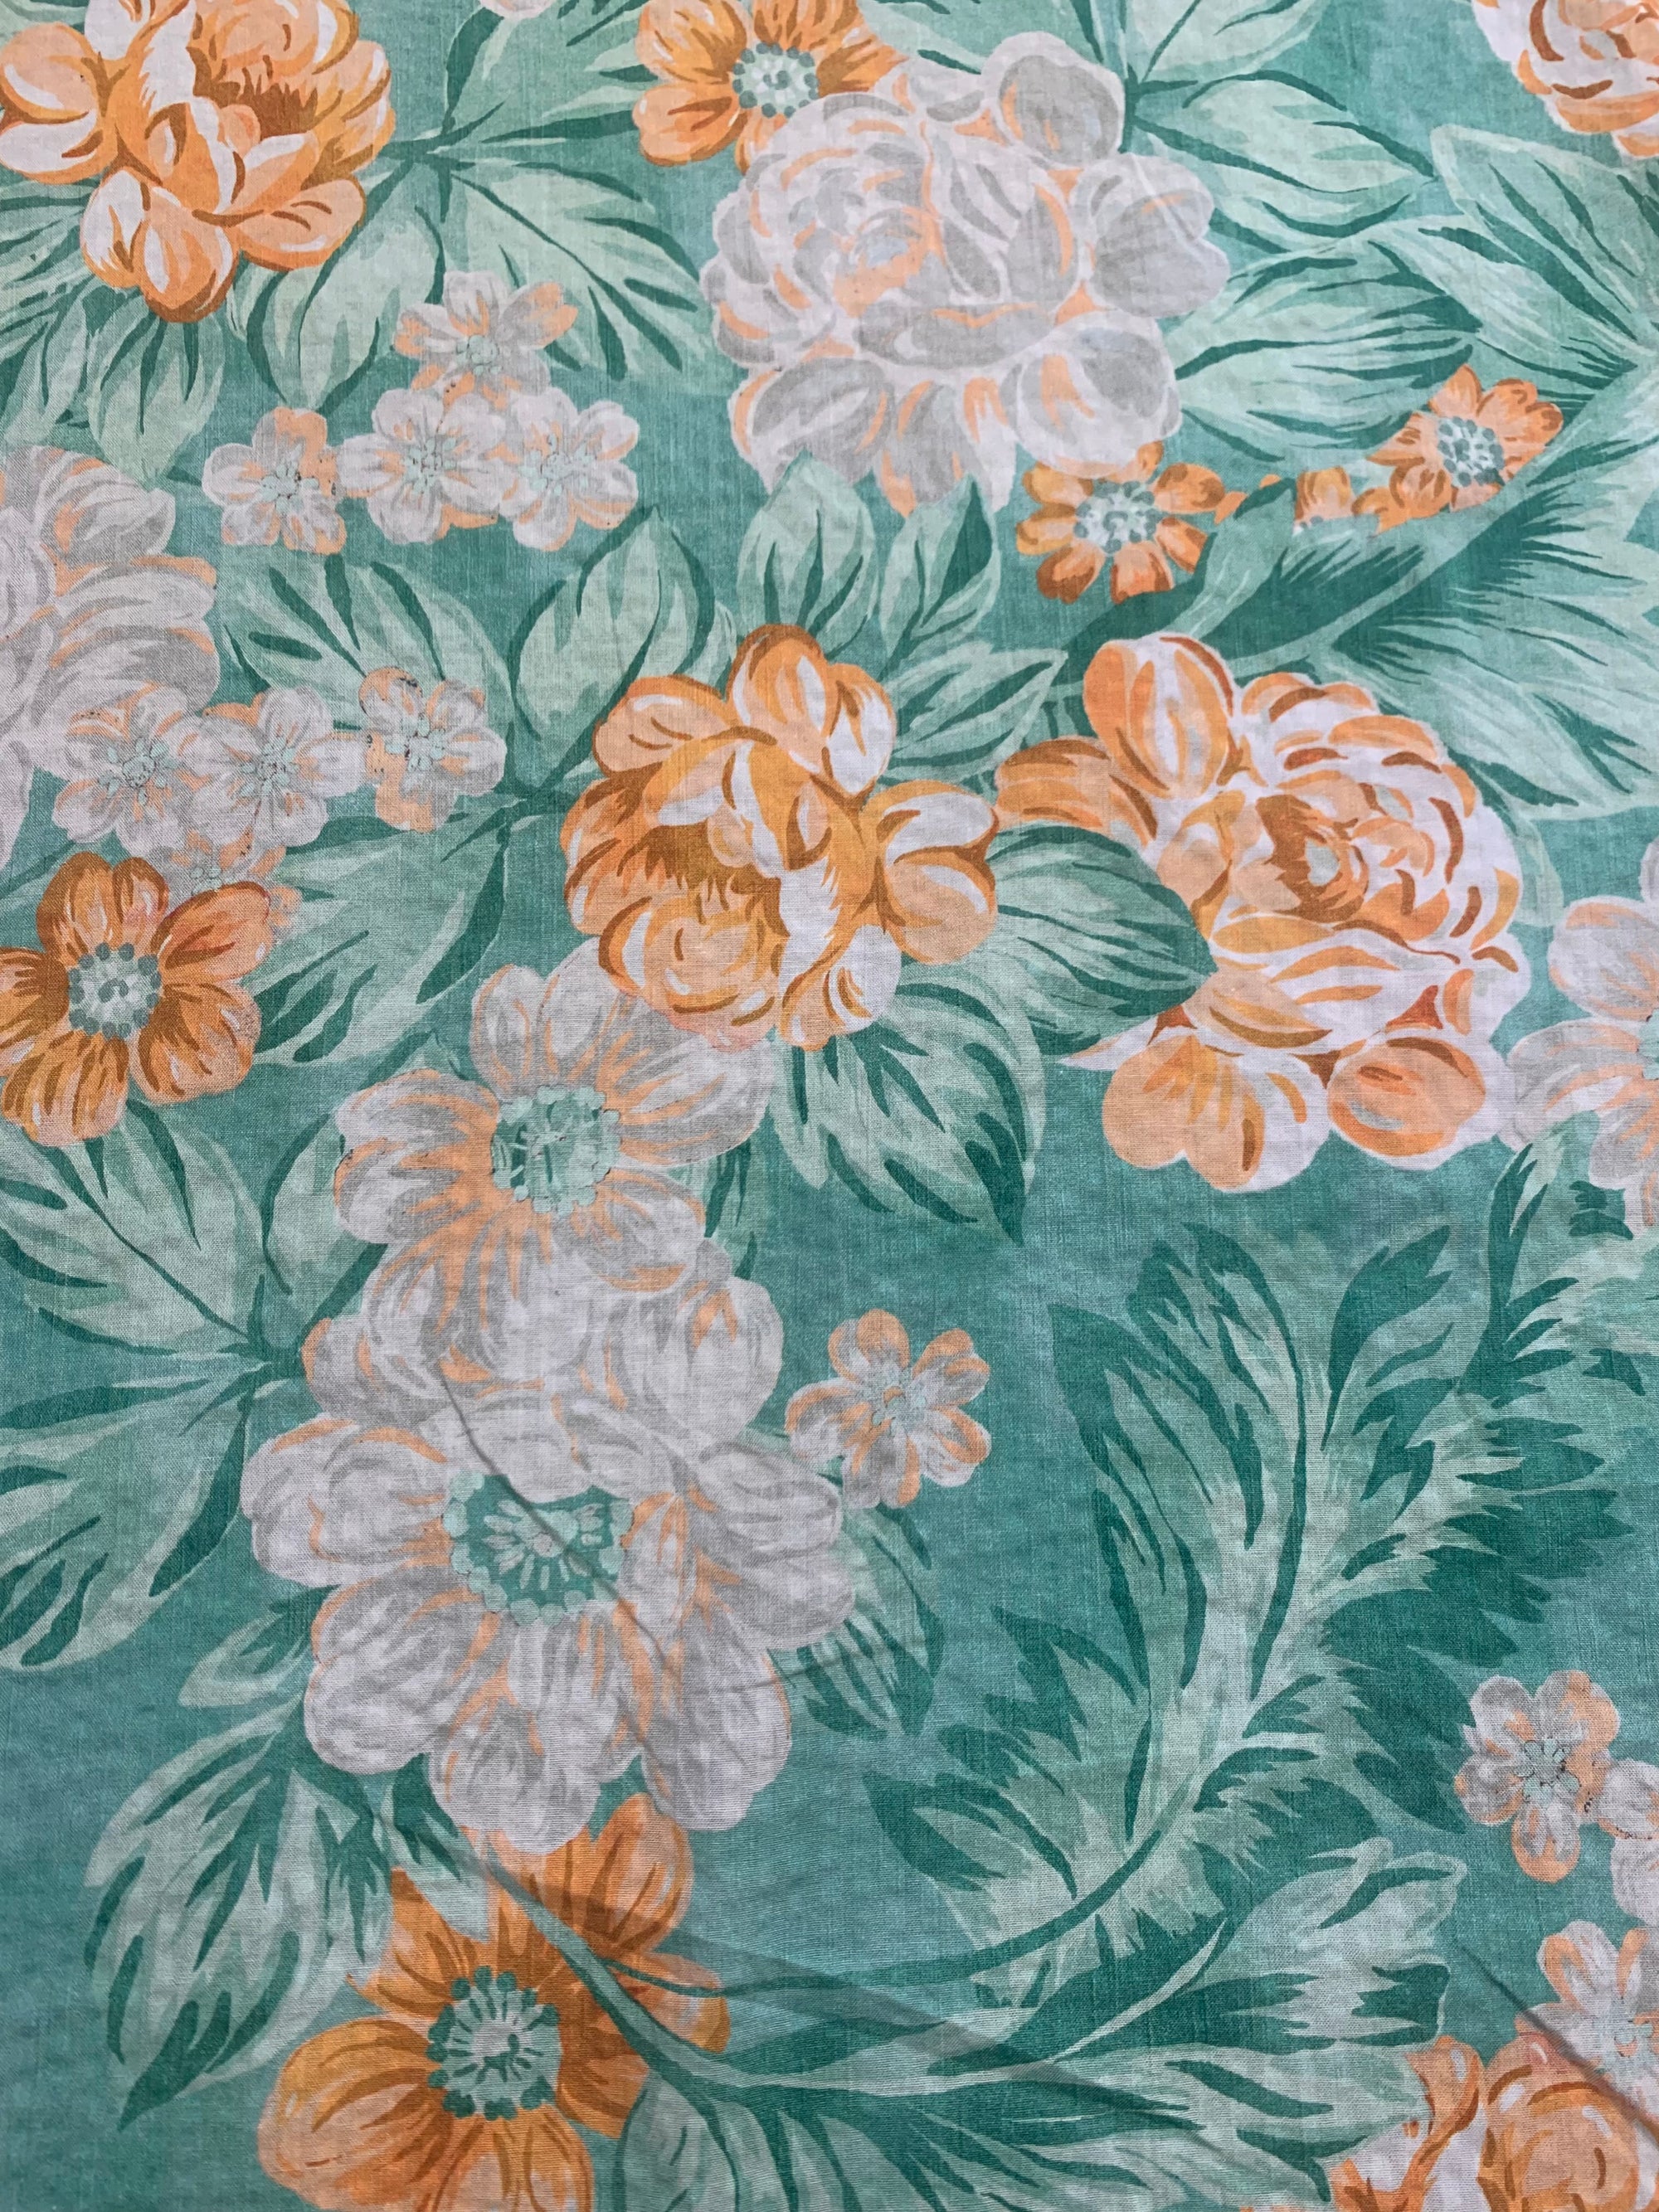 A summery flat cotton seersucker with a muted orange and green tropical print fabric with a measuring tape on top.